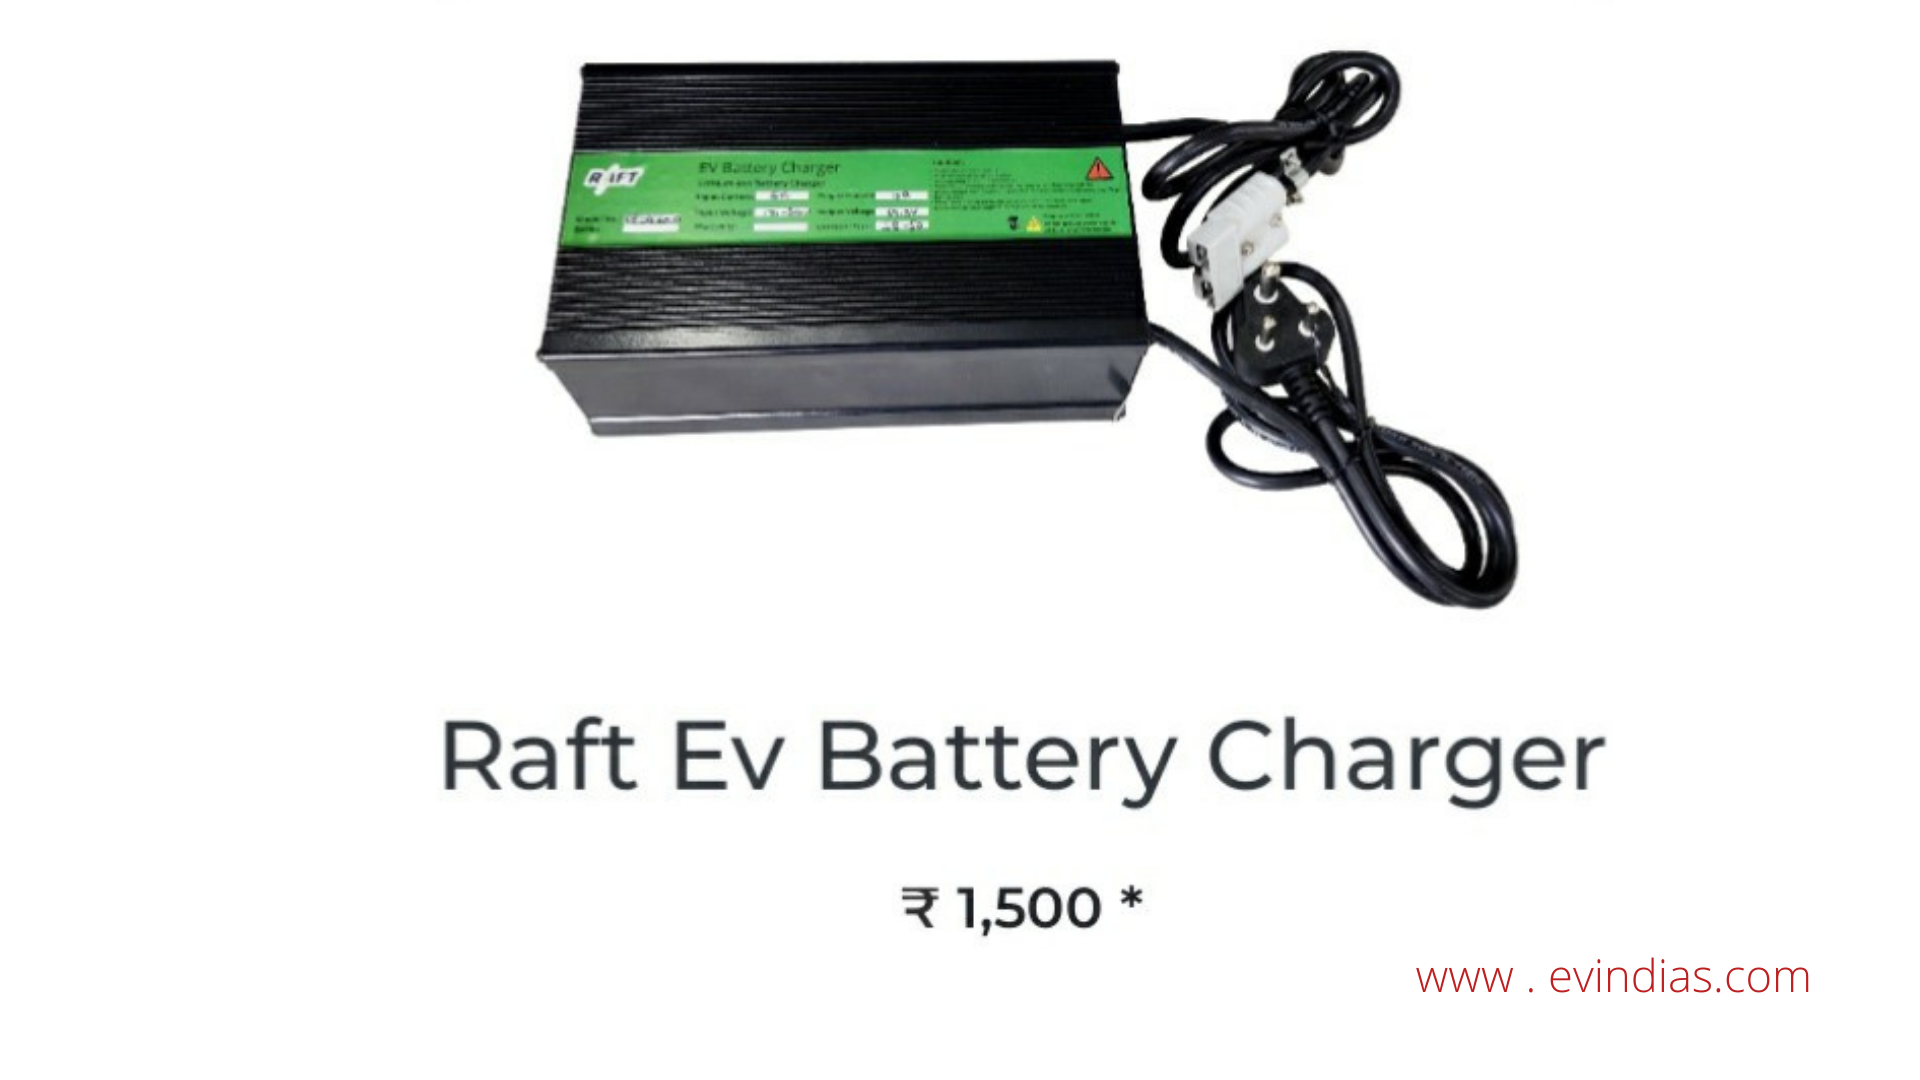 Raft battery charger